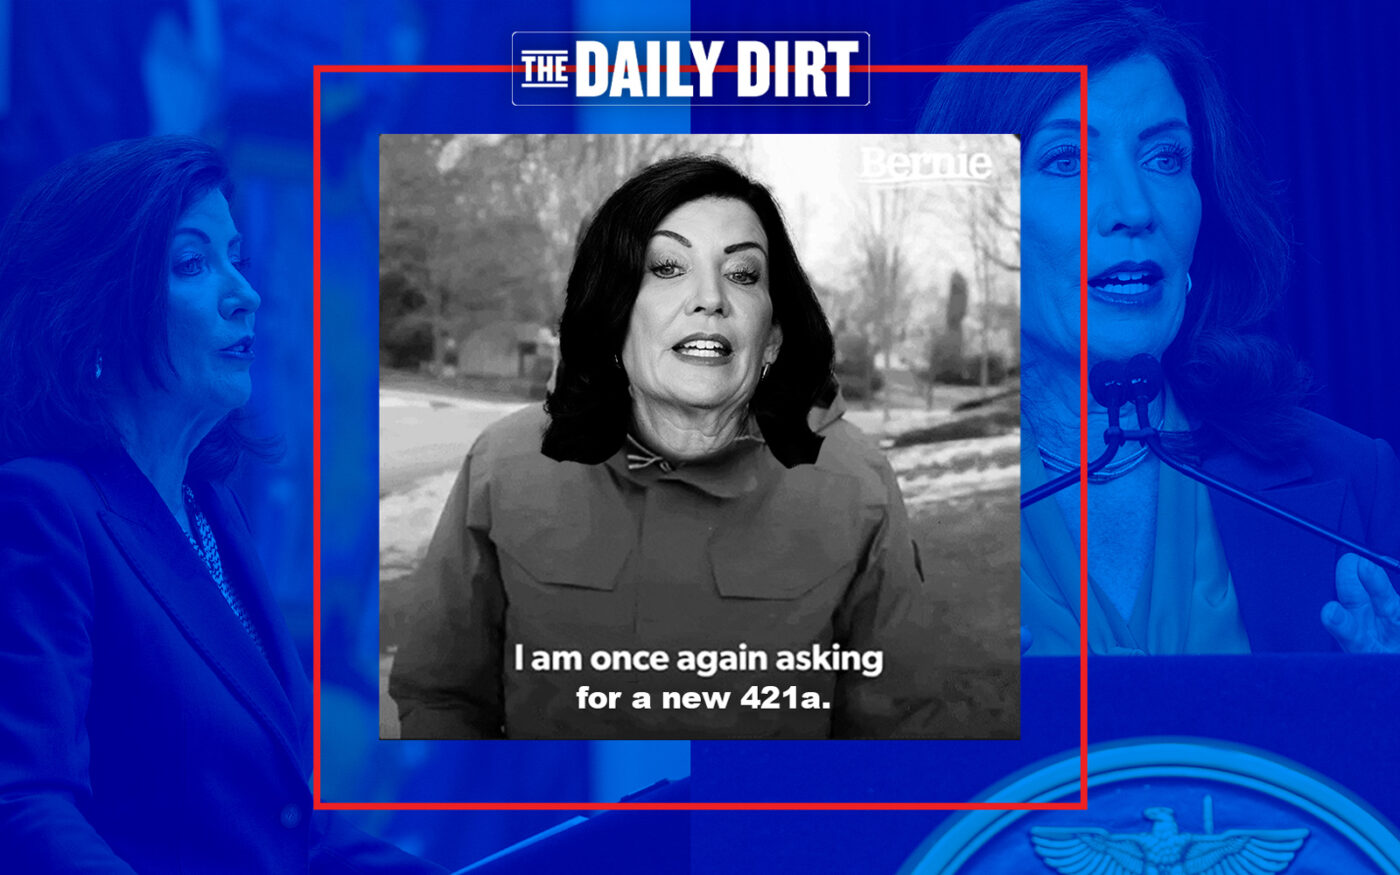 Kathy Hochul Seeks New 421a: The Daily Dirt